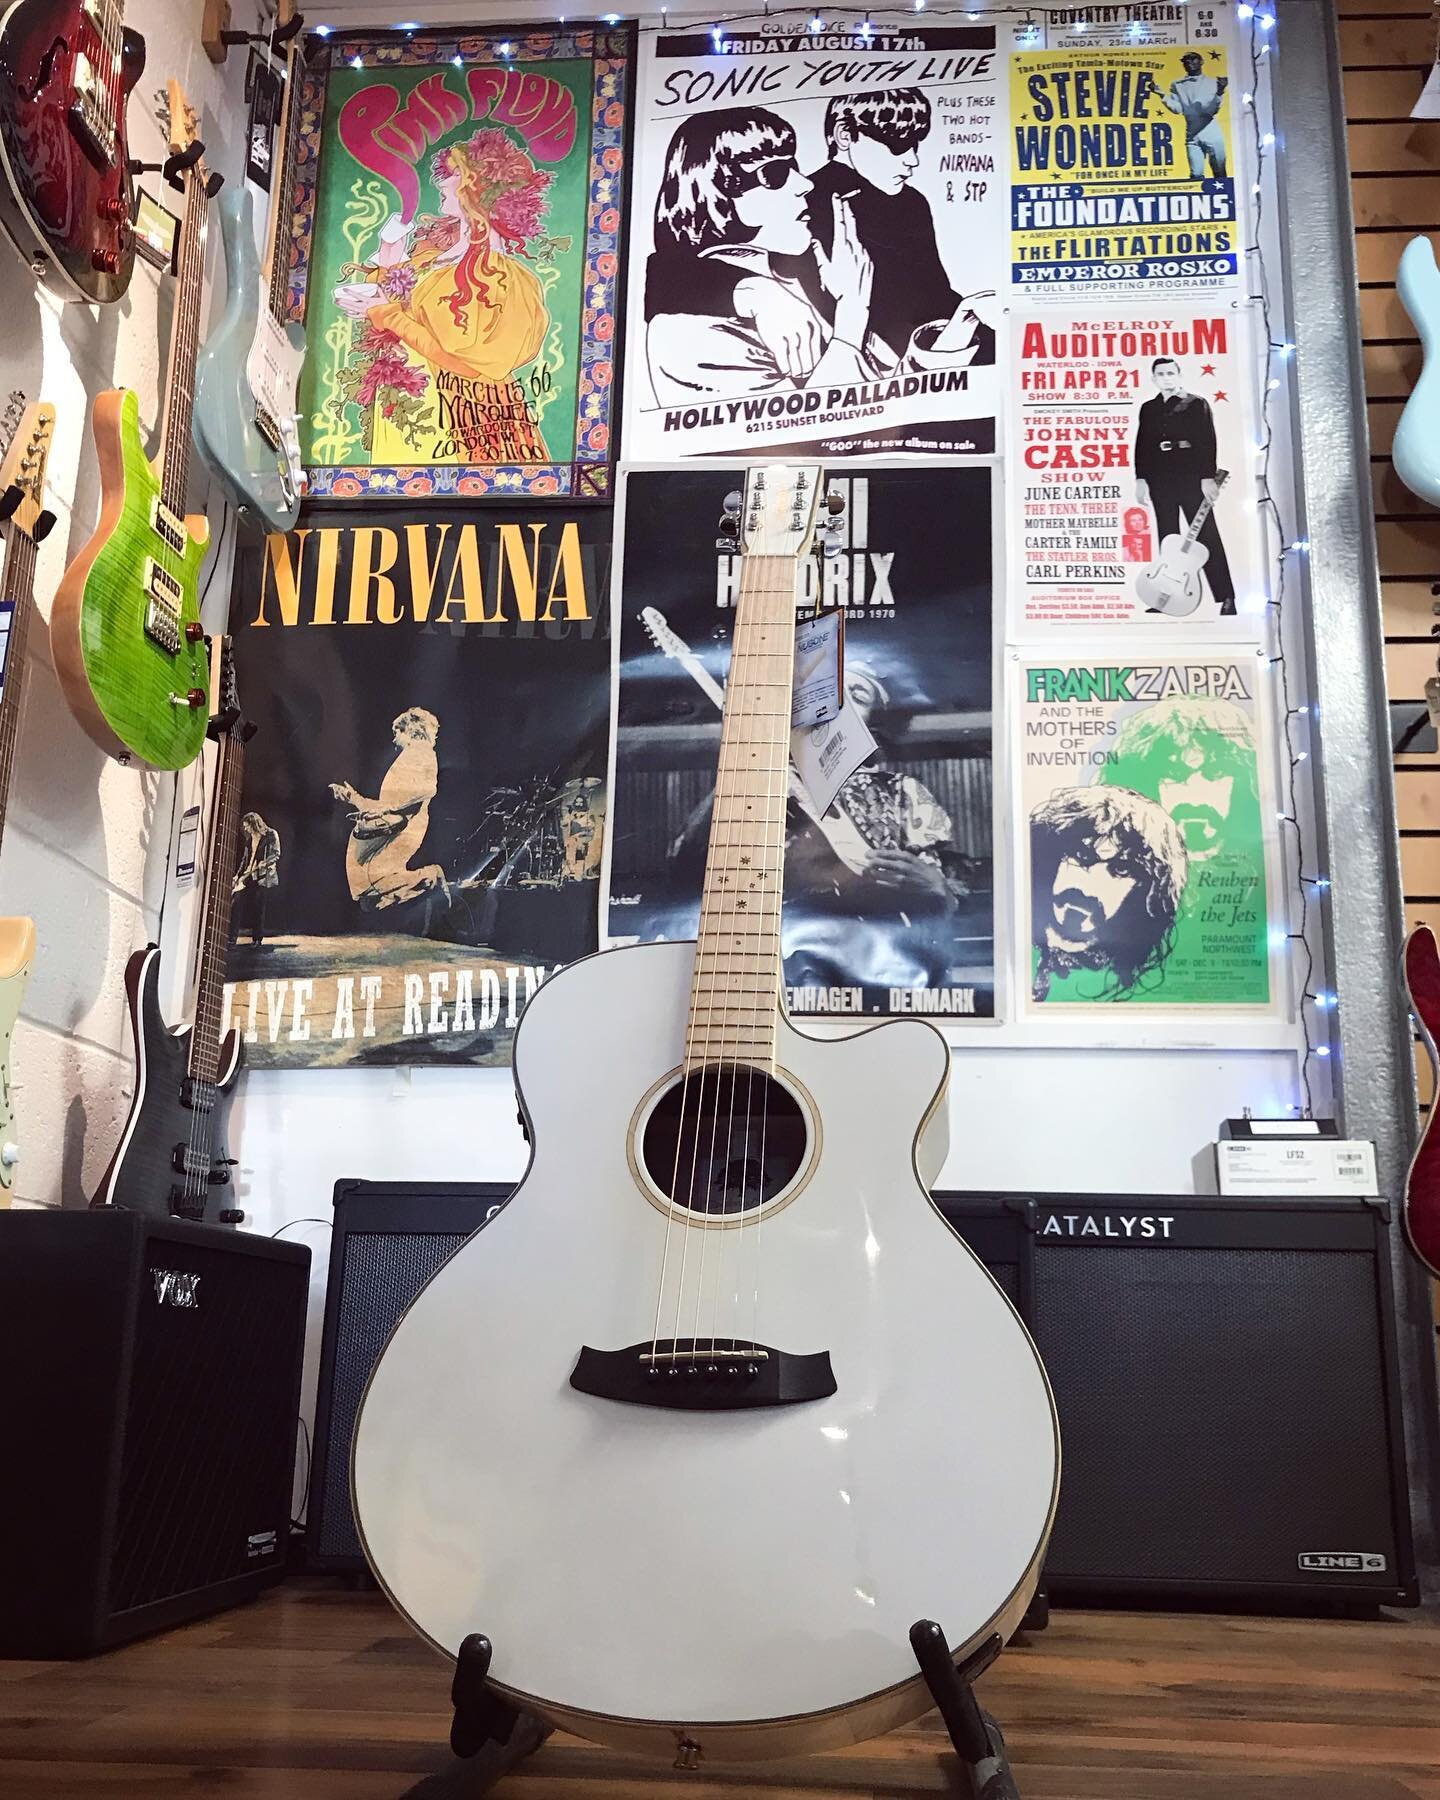 After something different for Christmas? 🎄
We&rsquo;ve got it! 
With a sparkly white gloss finish and a MAPLE fretboard, this @tanglewooduk Winterleaf Acoustic is a head turner, and possibly the most festive guitar we&rsquo;ve seen&hellip;⛄️